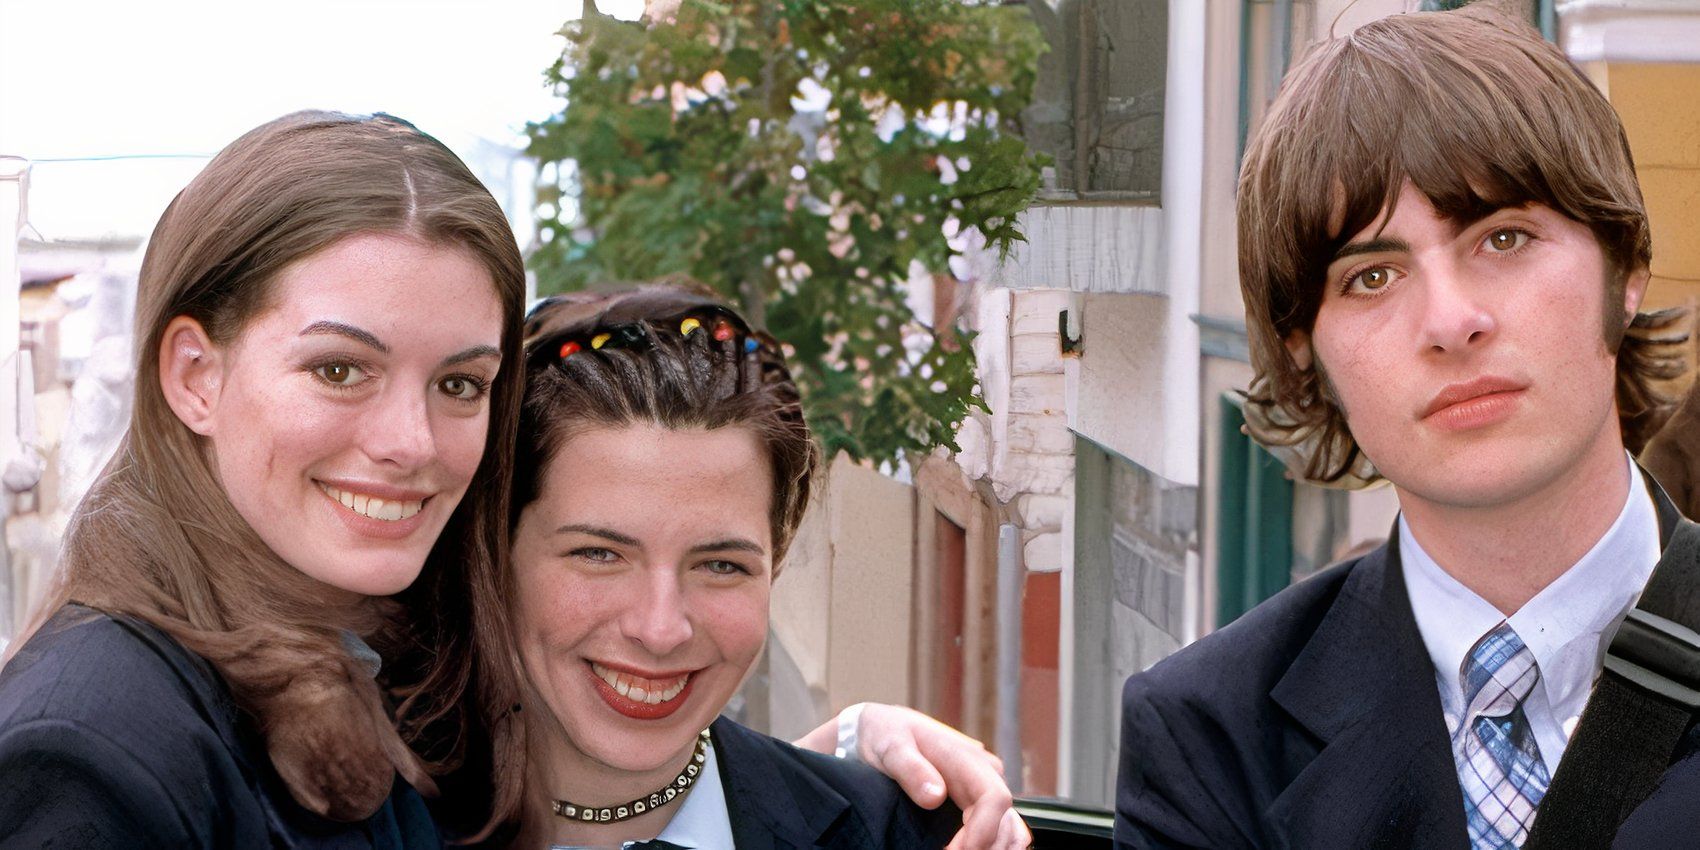 Mia, Lilly, and Michael standing together on the street in The Princess Diaries